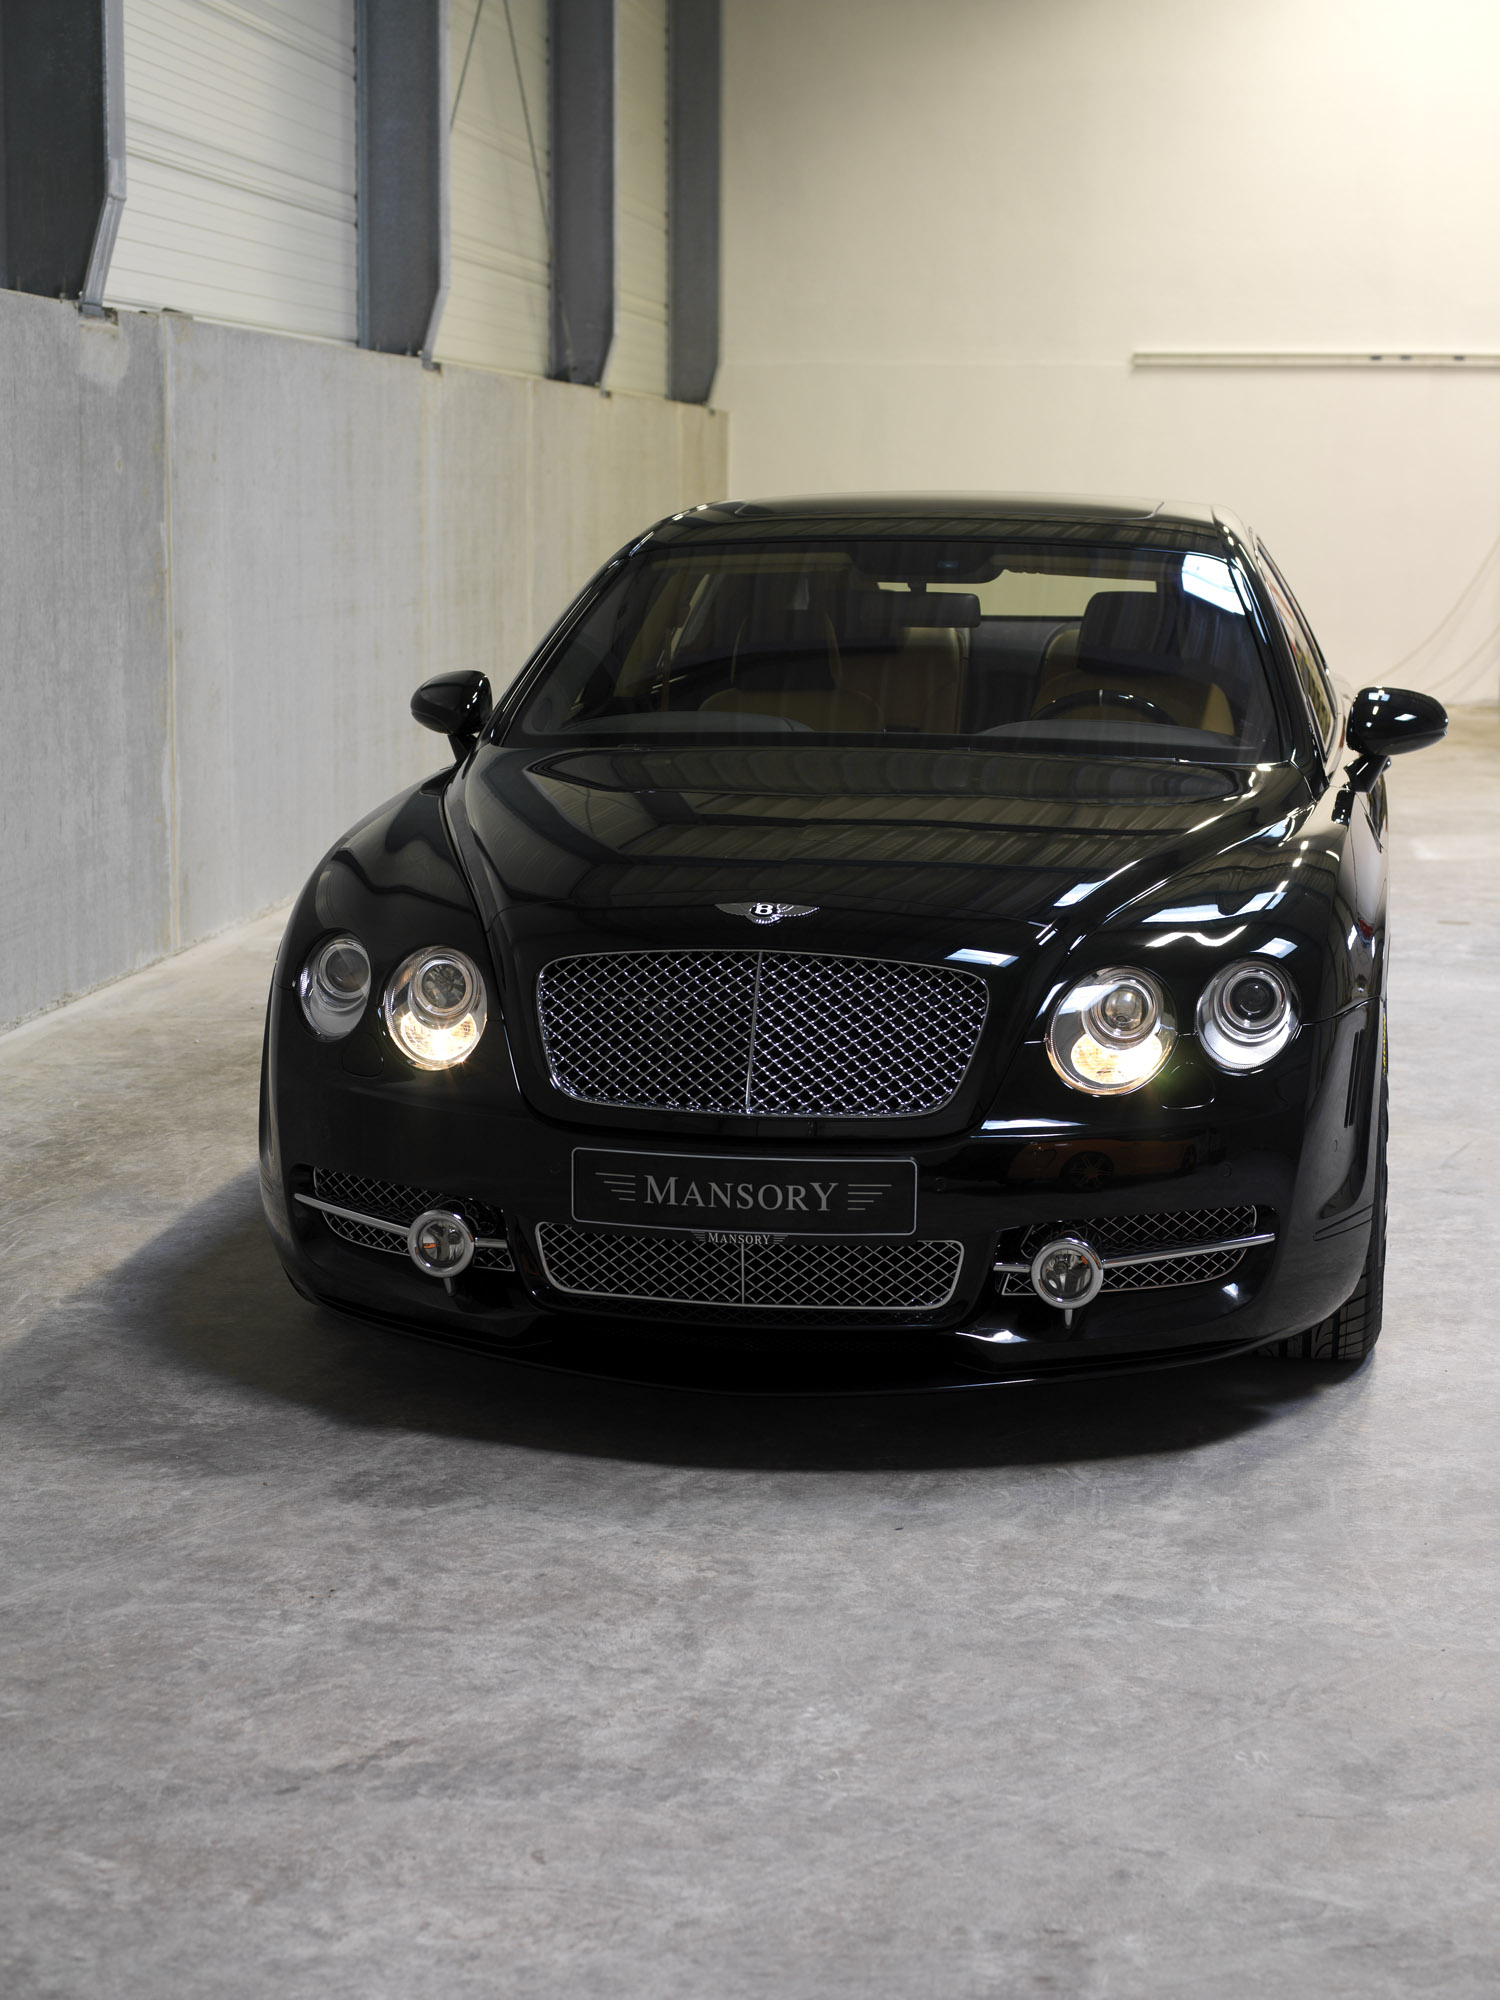 MANSORY Bentley Flying Spur photo #1